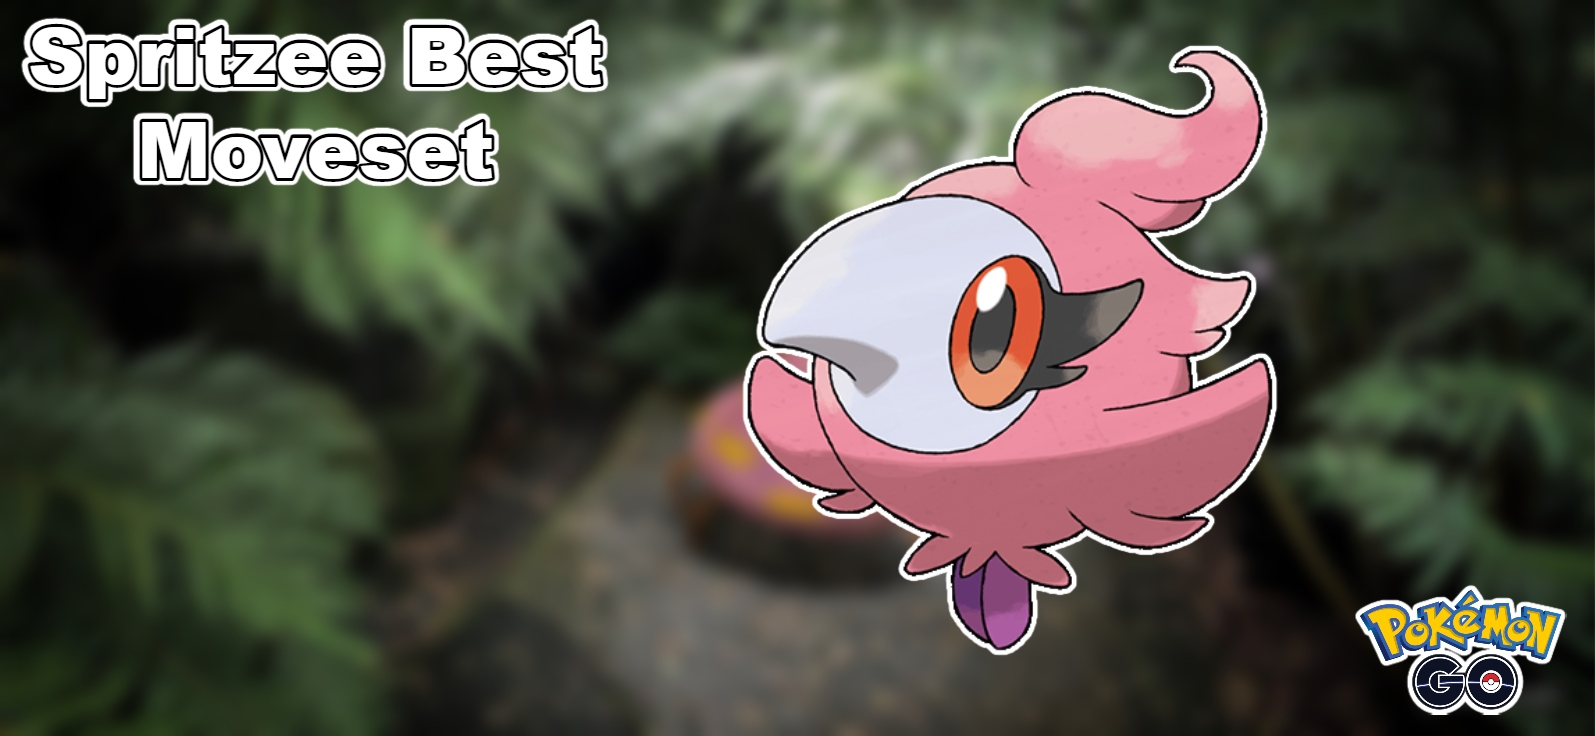 You are currently viewing Spritzee Best Moveset In Pokemon Go